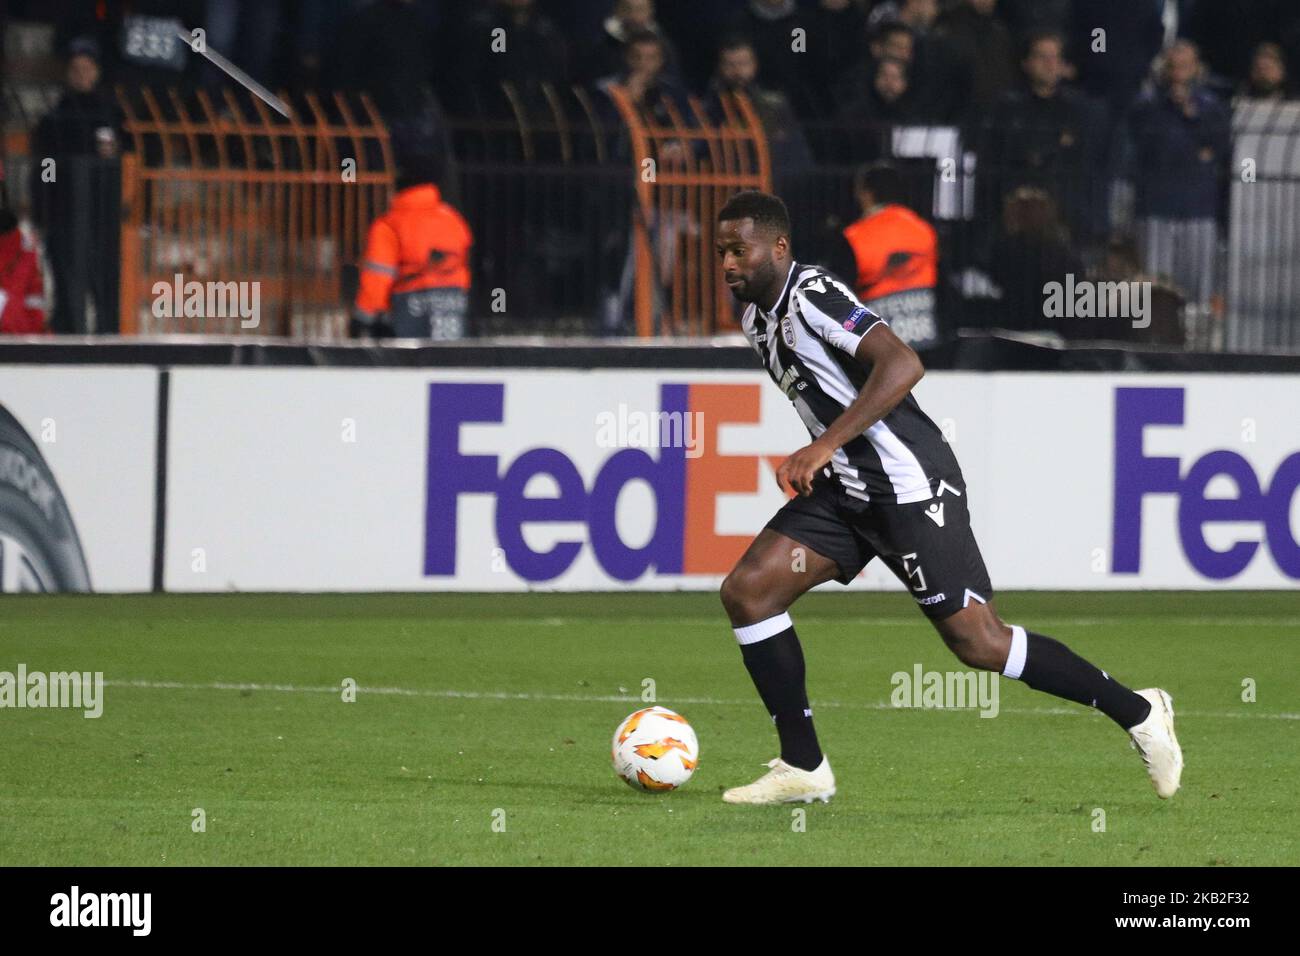 Fernando Varela or Fernando Lopes dos Santos Varela (PAOK). FC PAOK vs MOL Vidi FC 0-2 game at Toumba stadium in Thessaloniki, Greece for the UEFA Europa League Group L. Videon scored at 12' with Szabolcs Huszti and at 45' with Stopira. PAOK had the 74% Possession with 12 final shots, 0 yellow cards against Vidi with 5 final shots and 5 yellow cards. (Photo by Nicolas Economou/NurPhoto) Stock Photo